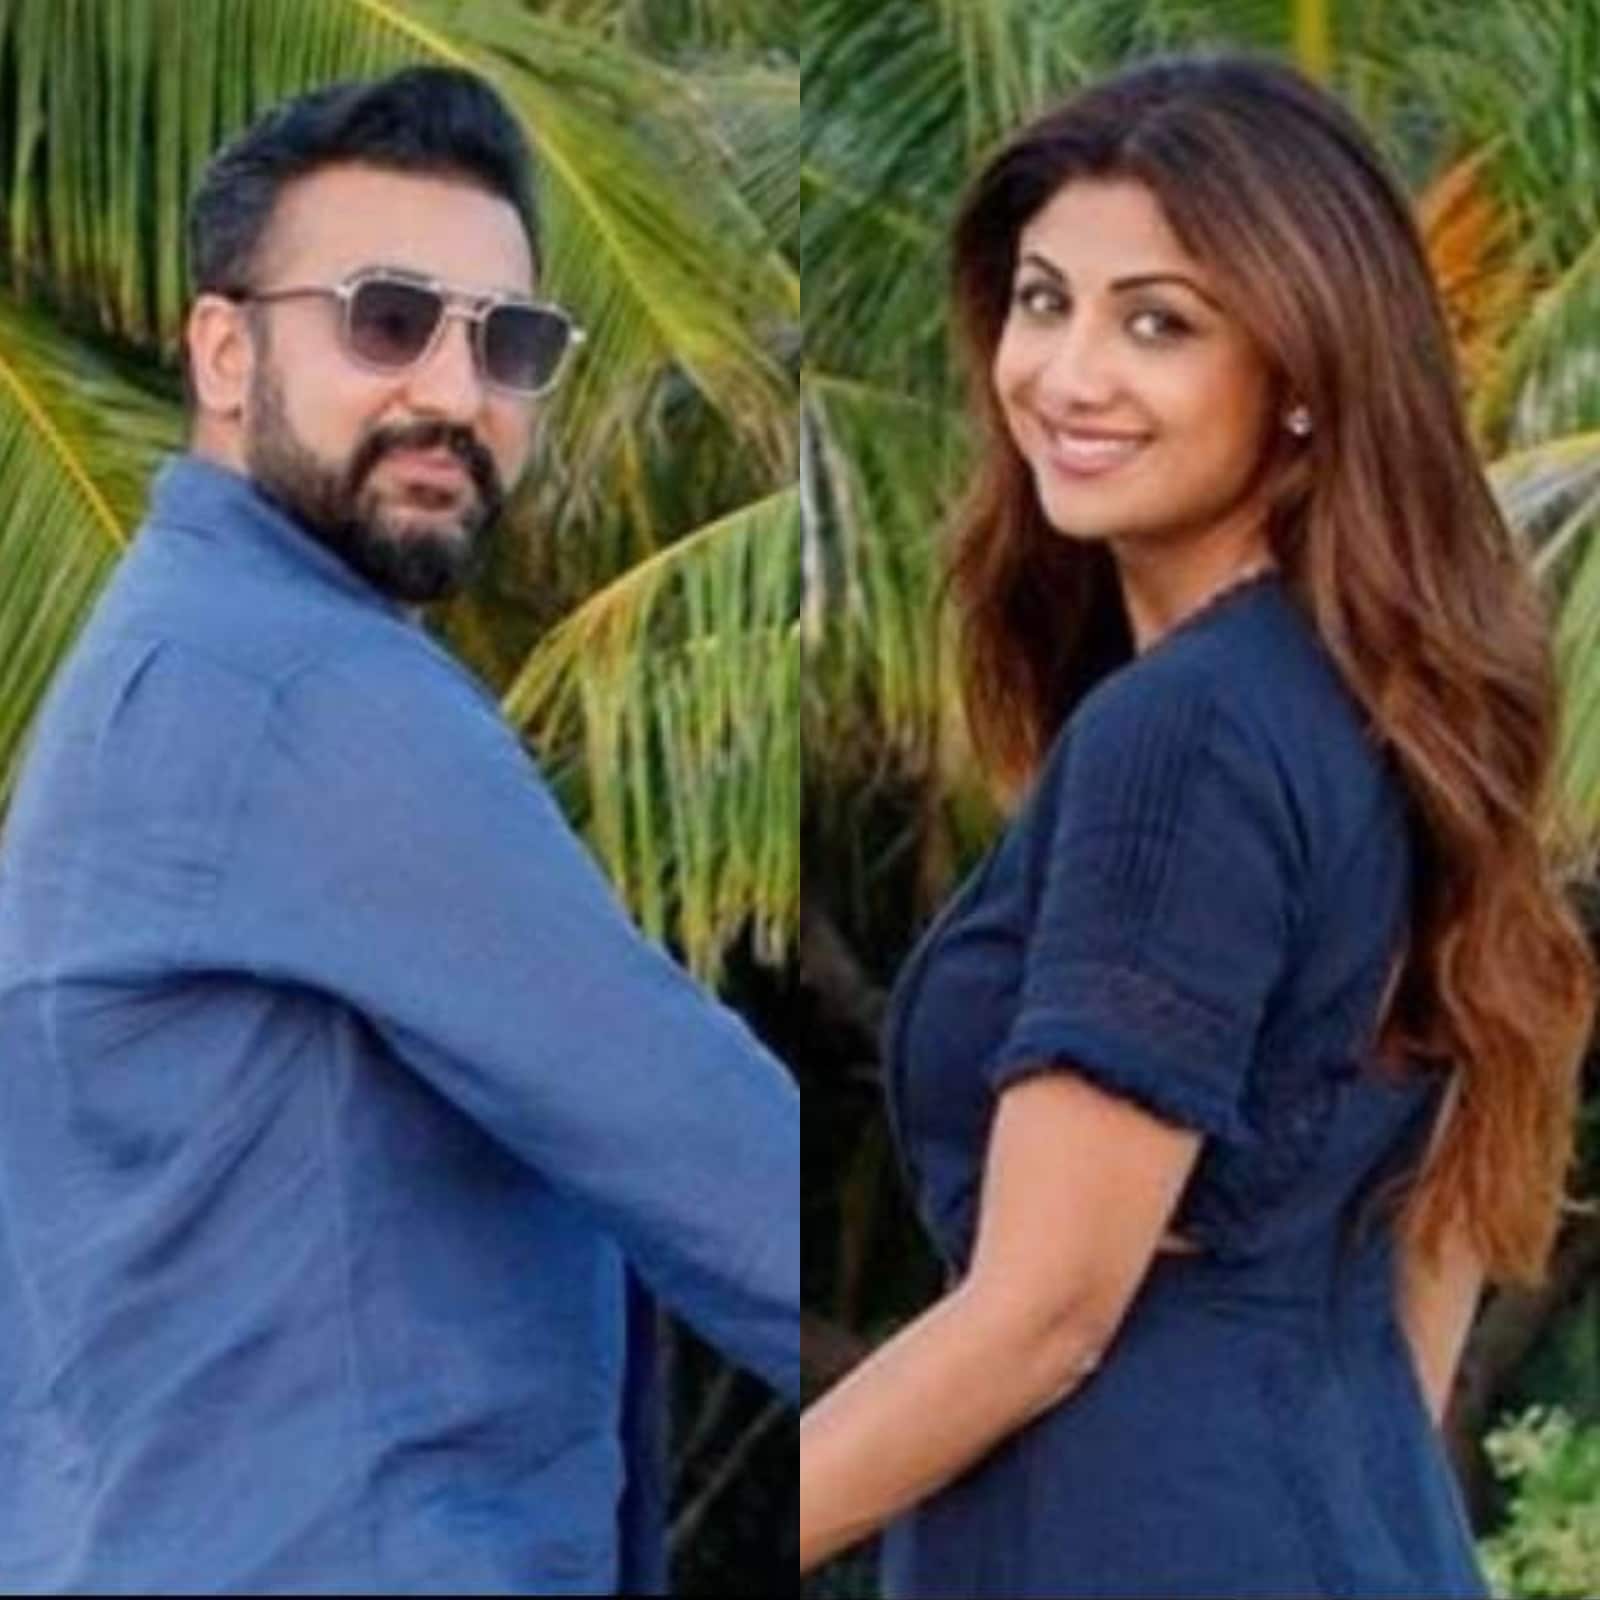 Shilpa Shatty Ki Chudai Download - Shilpa Shetty Shares Cryptic Post After Raj Kundra Quits Social Media: What  You'll Discover is Yourself